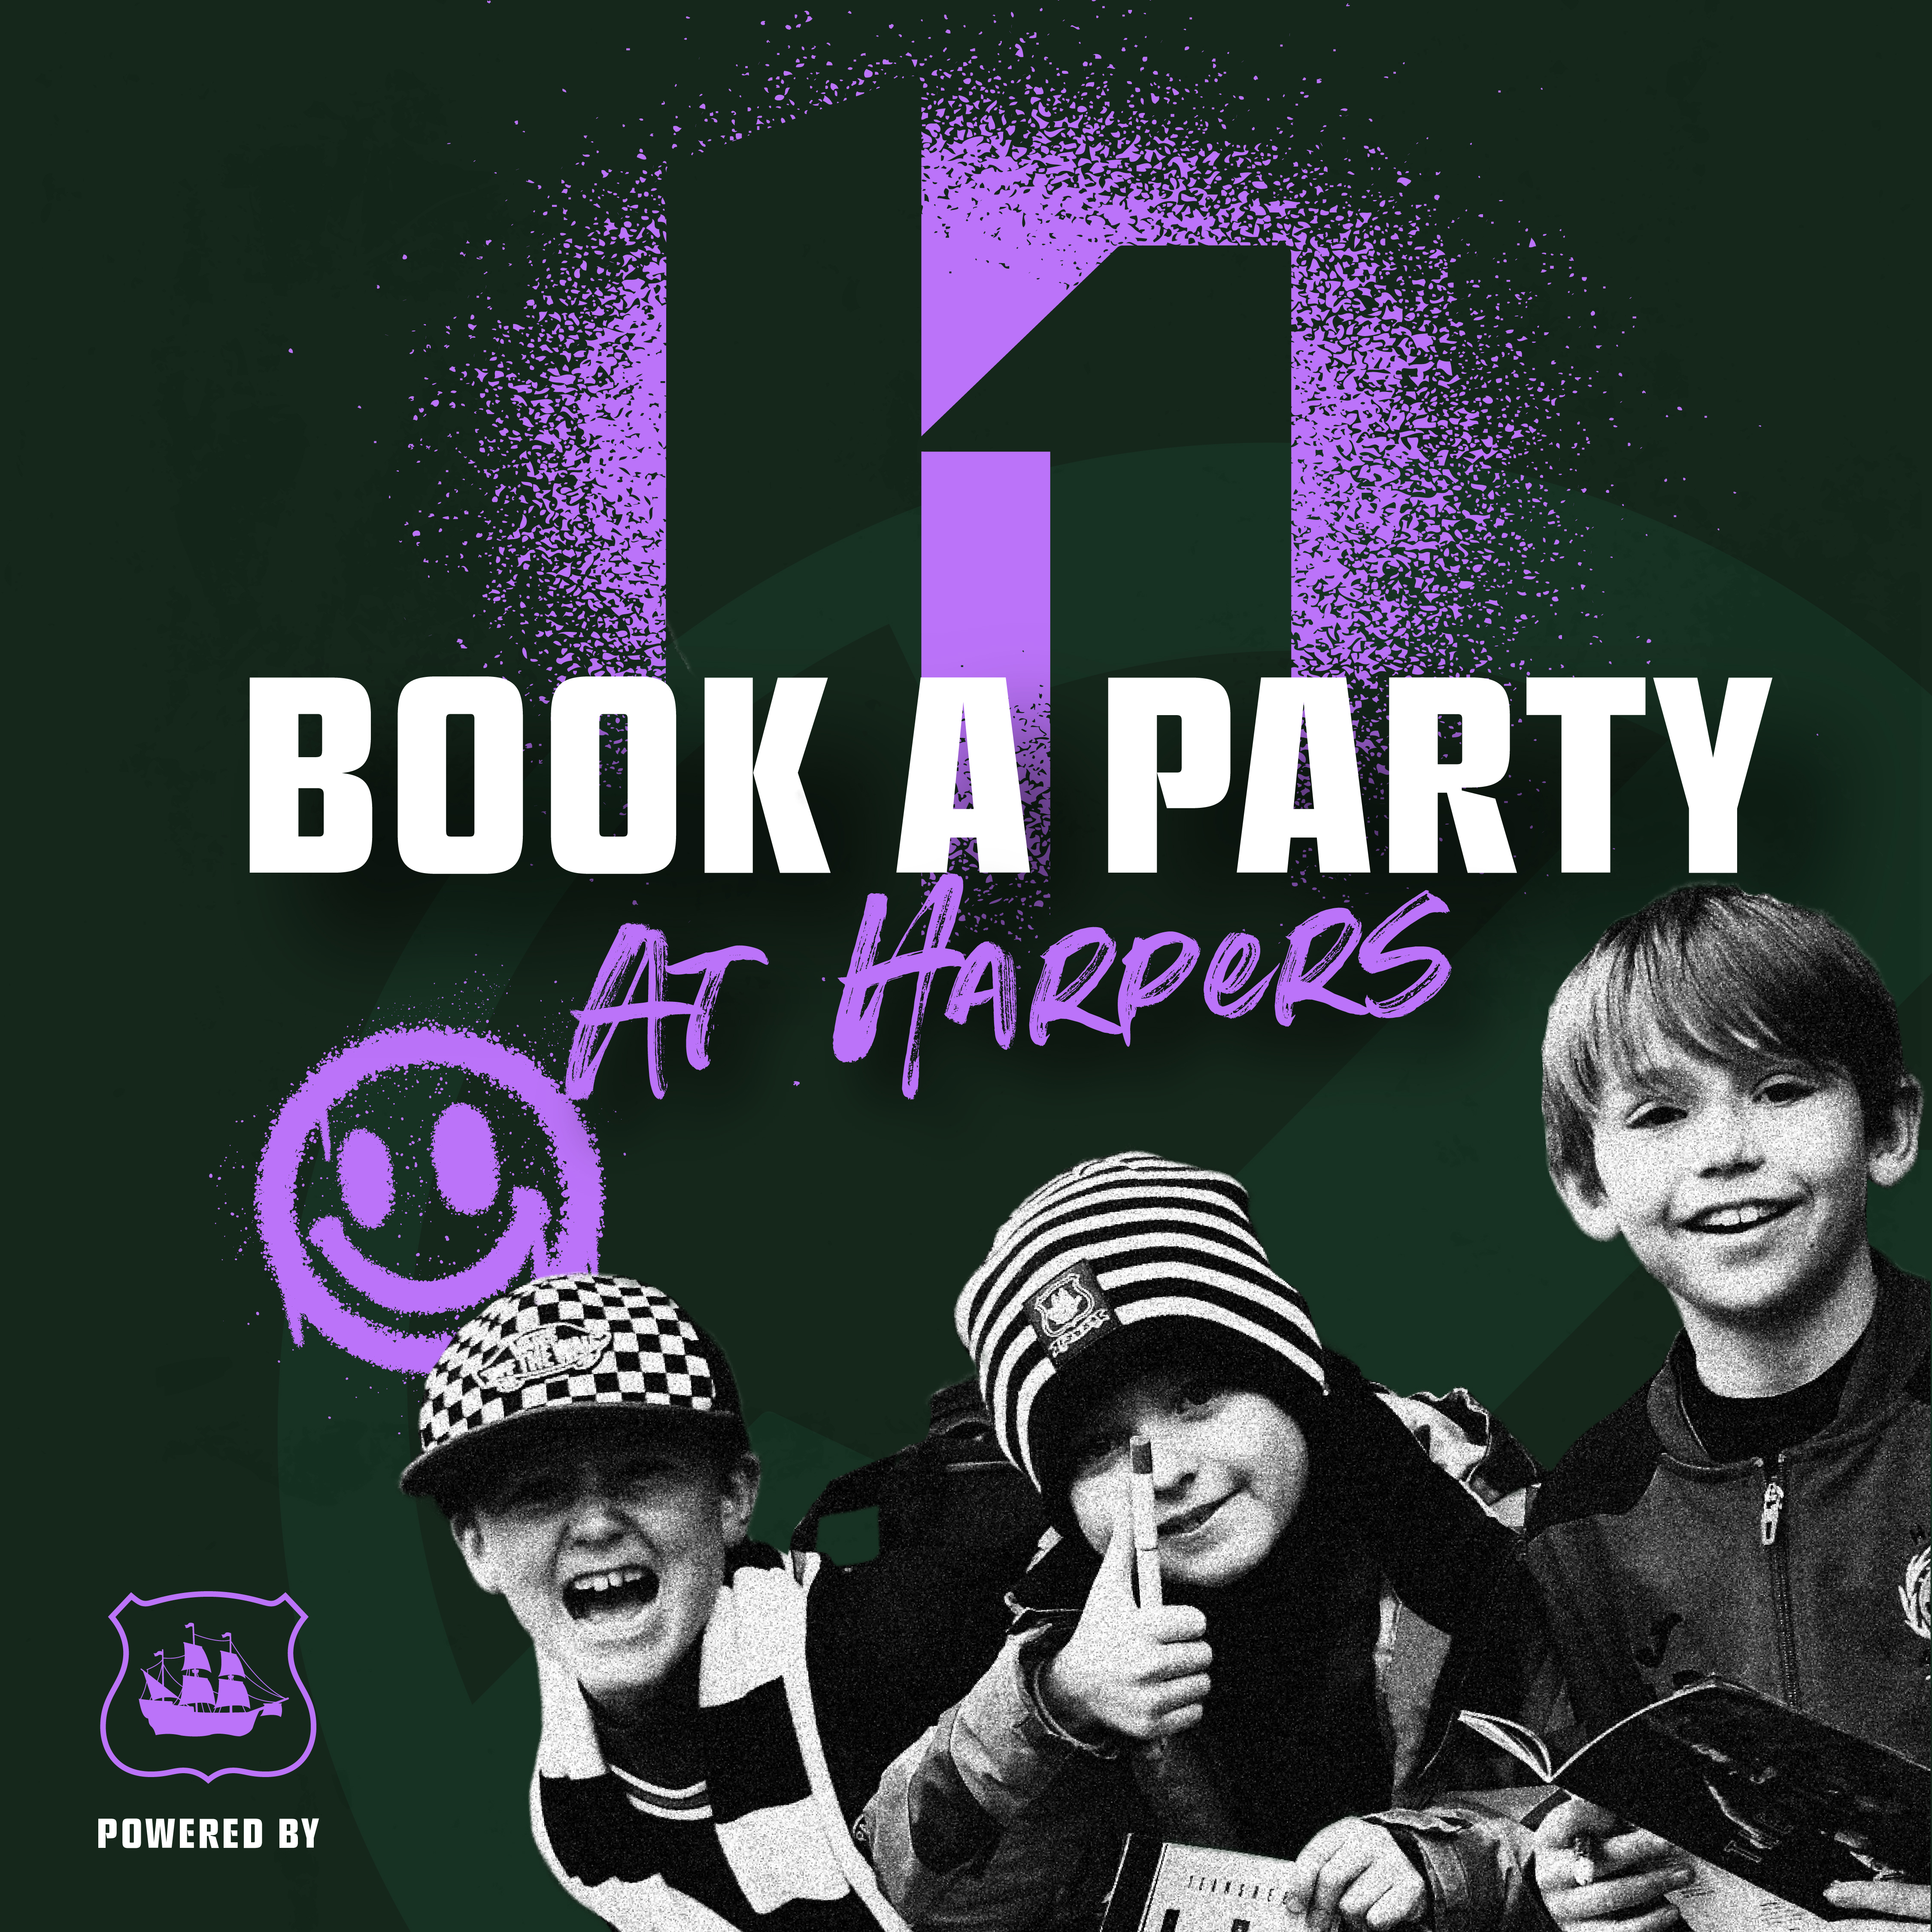 Book a Party at Harpers